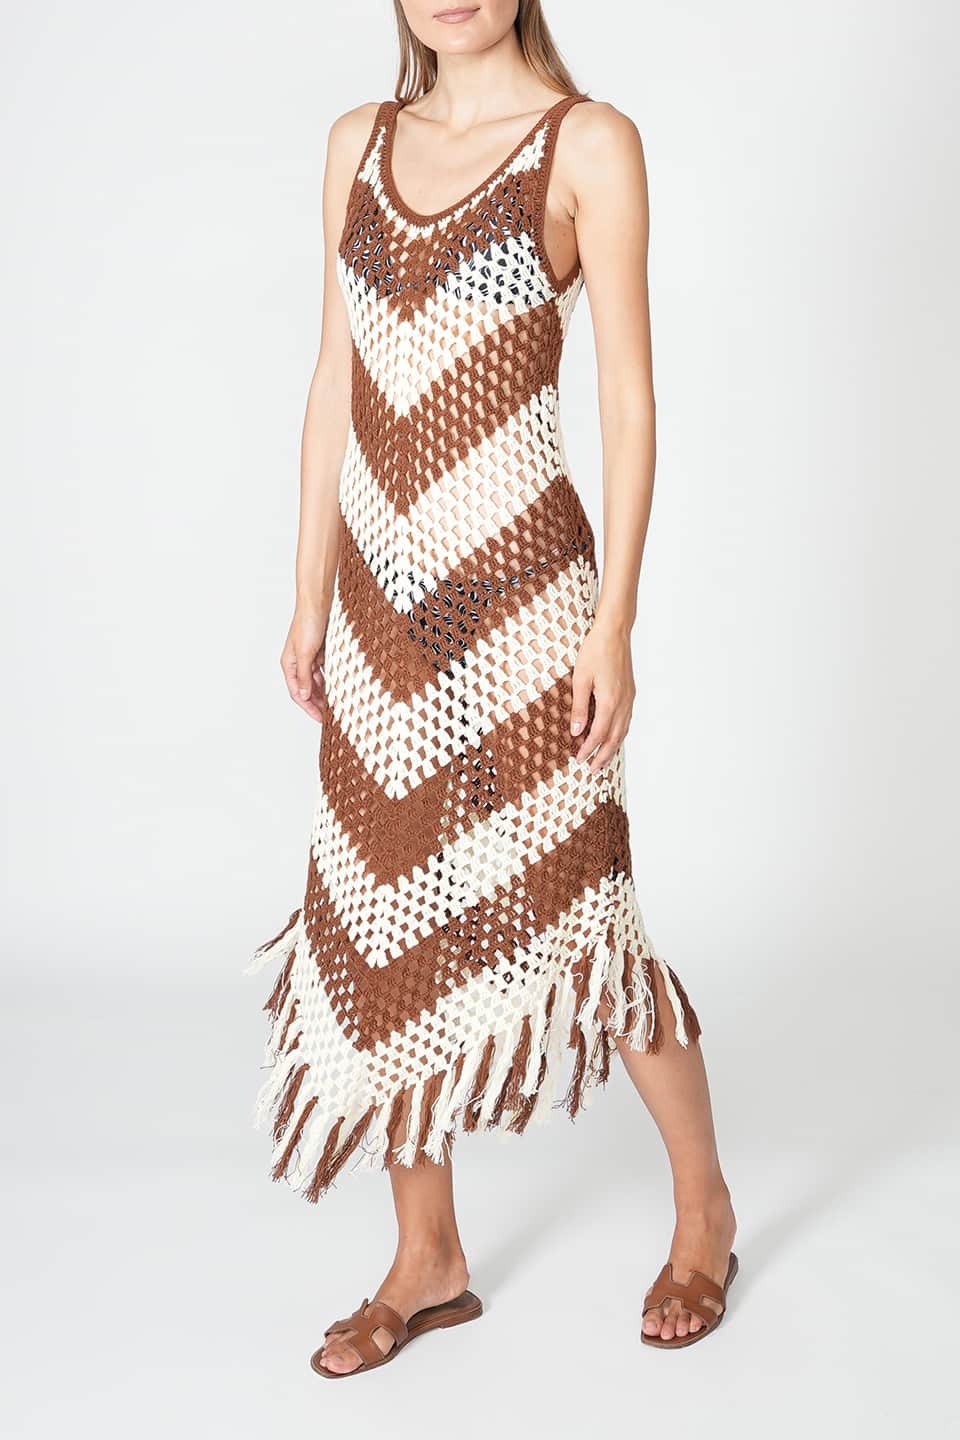 Thumbnail for Product gallery 2, Mellor Dress Brown/Cream